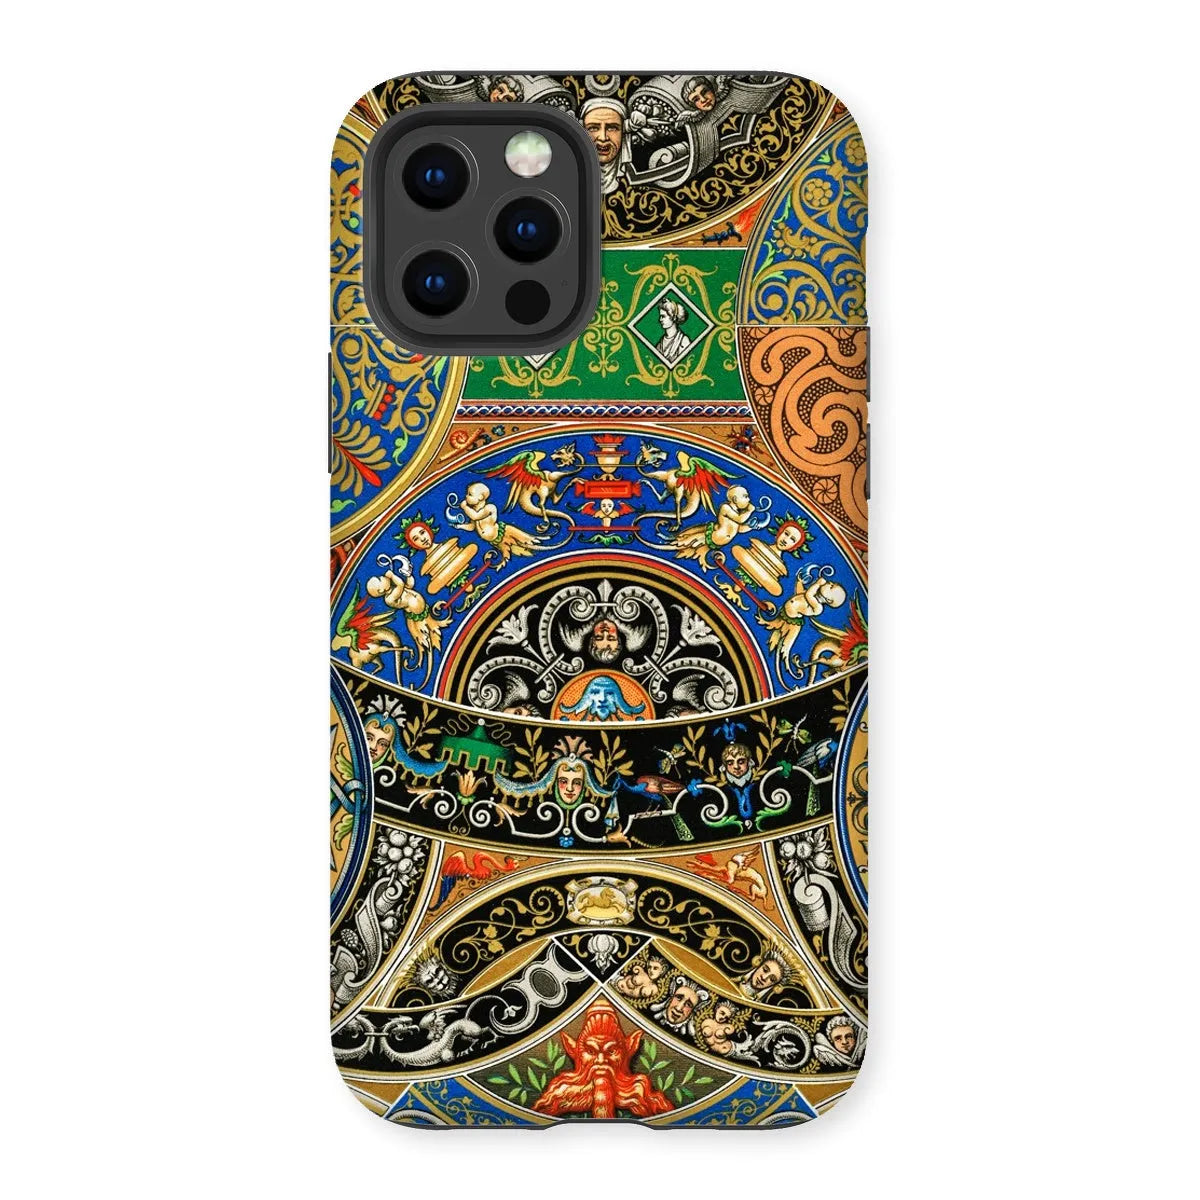 Renaissance Pattern 2 By Auguste Racinet Tough Phone Case - Iphone 12 Pro / Gloss - Mobile Phone Cases - Aesthetic Art